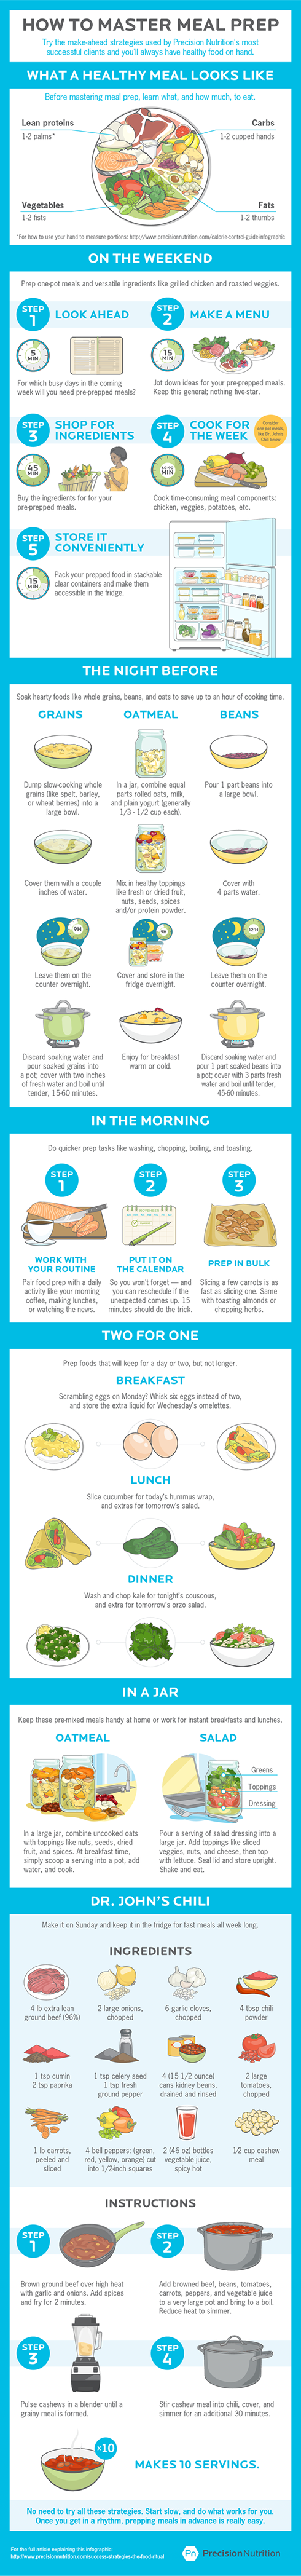 Create The Perfect Meal Plan With This Simple Guide